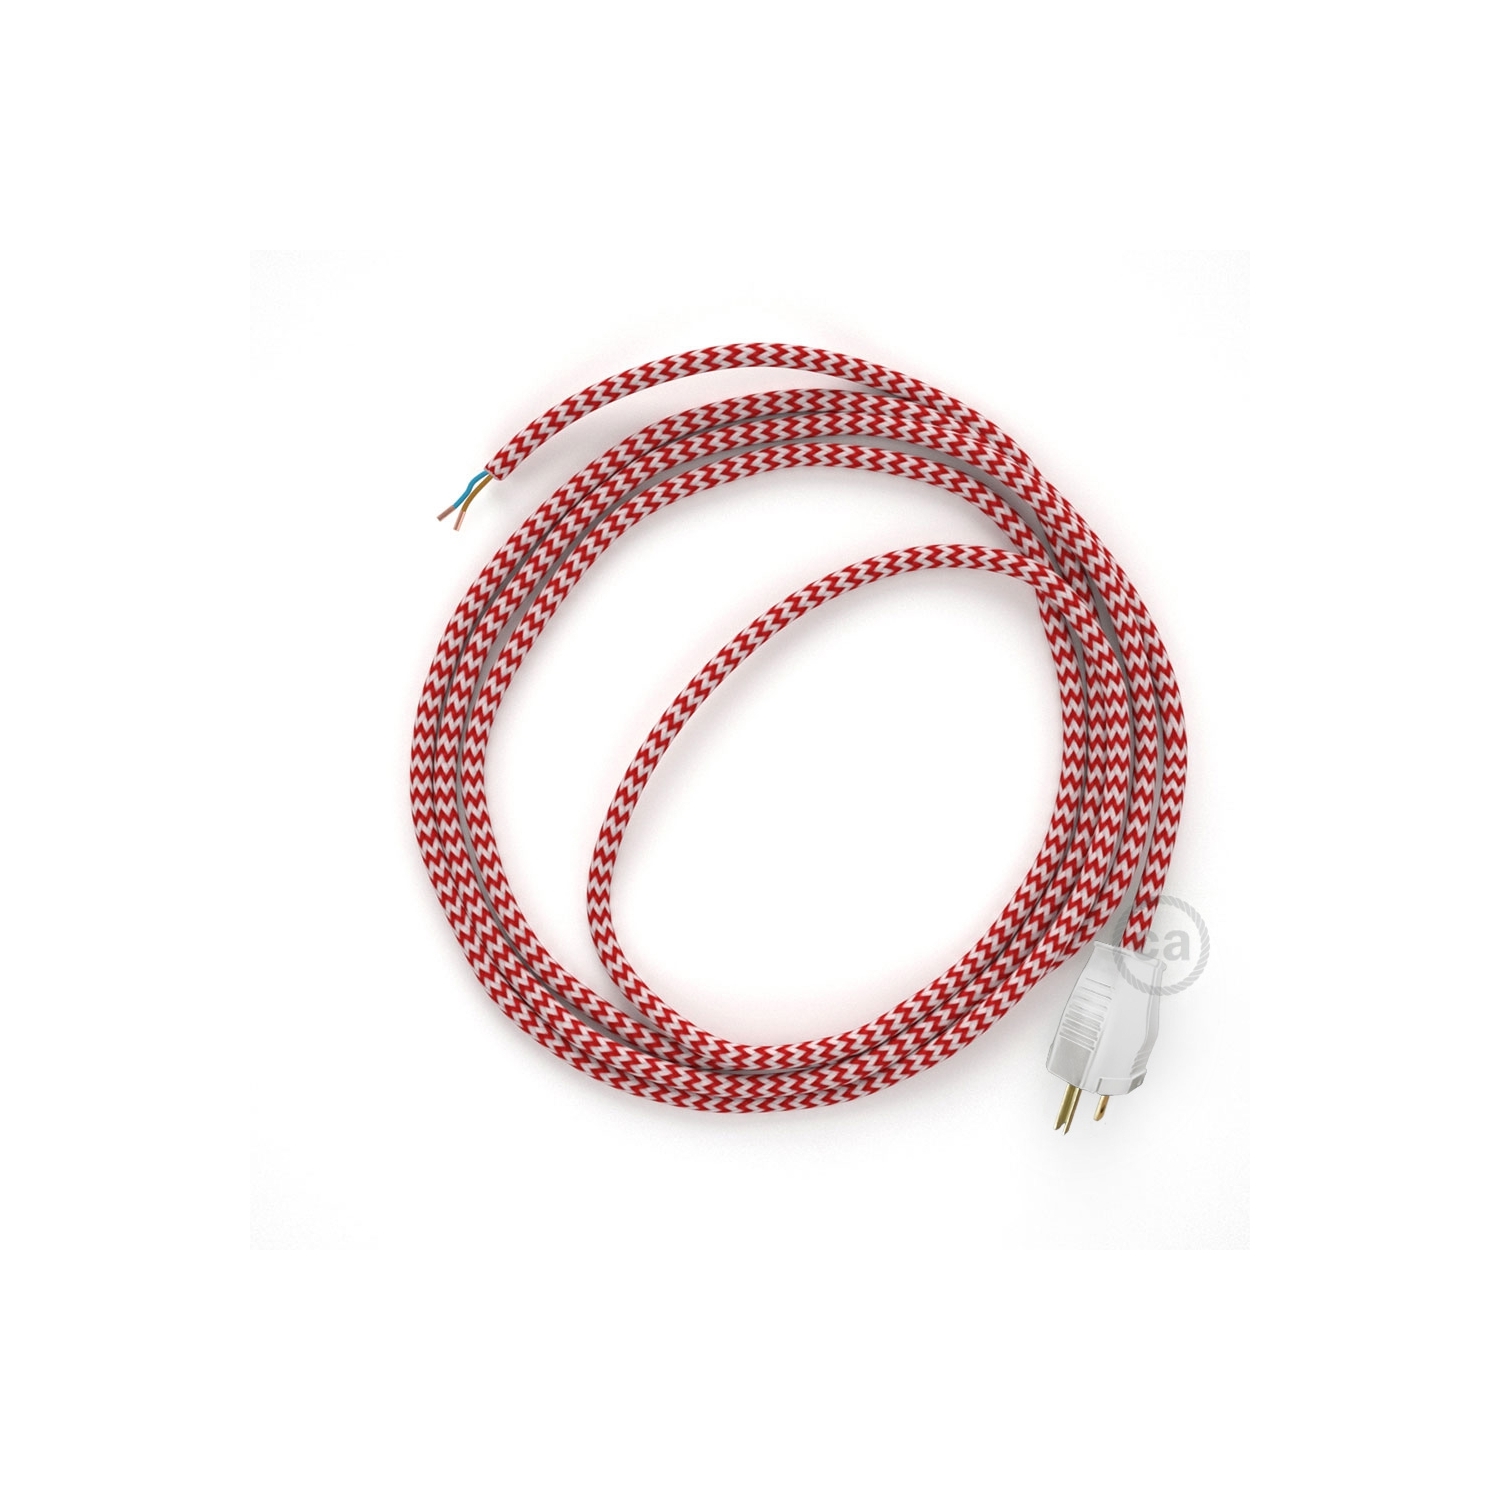 Cord-set - RZ09 Red & White Chevron Covered Round Cable